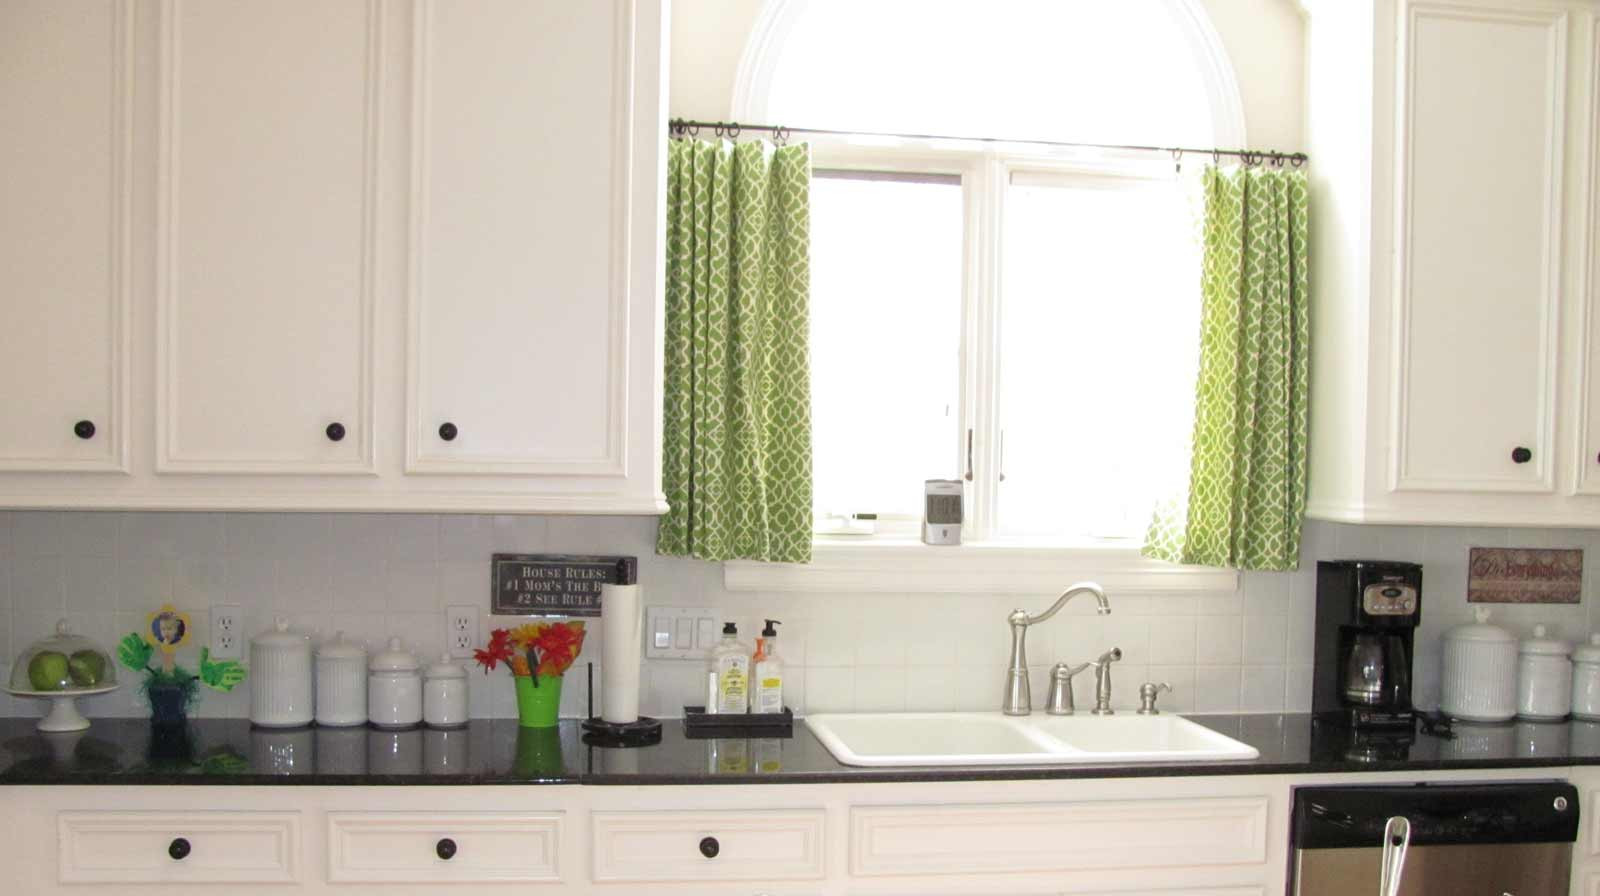 Kitchen Cafe Curtains
 Cafe Curtains for Kitchen Ideas